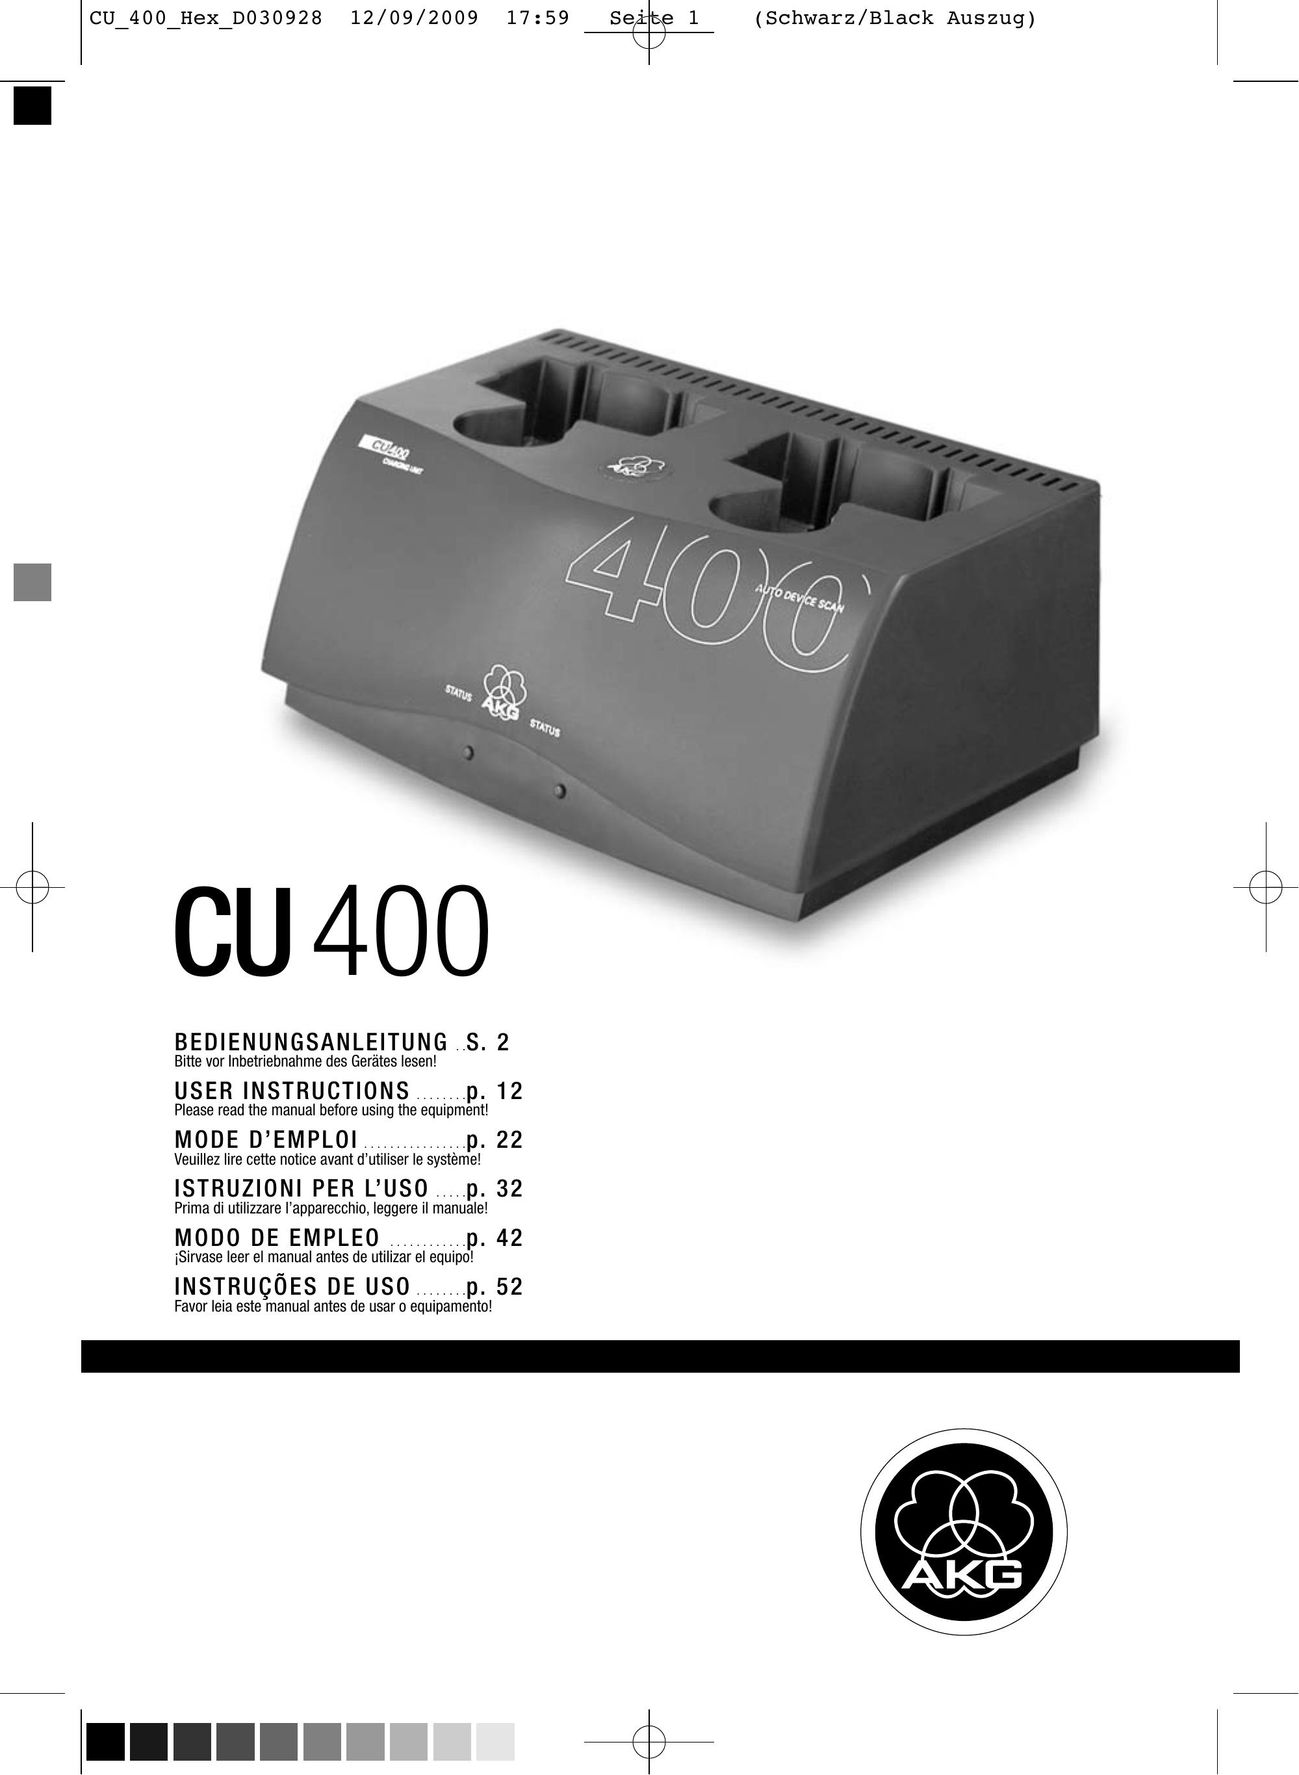 AKG Acoustics CU400 Battery Charger User Manual (Page 1)